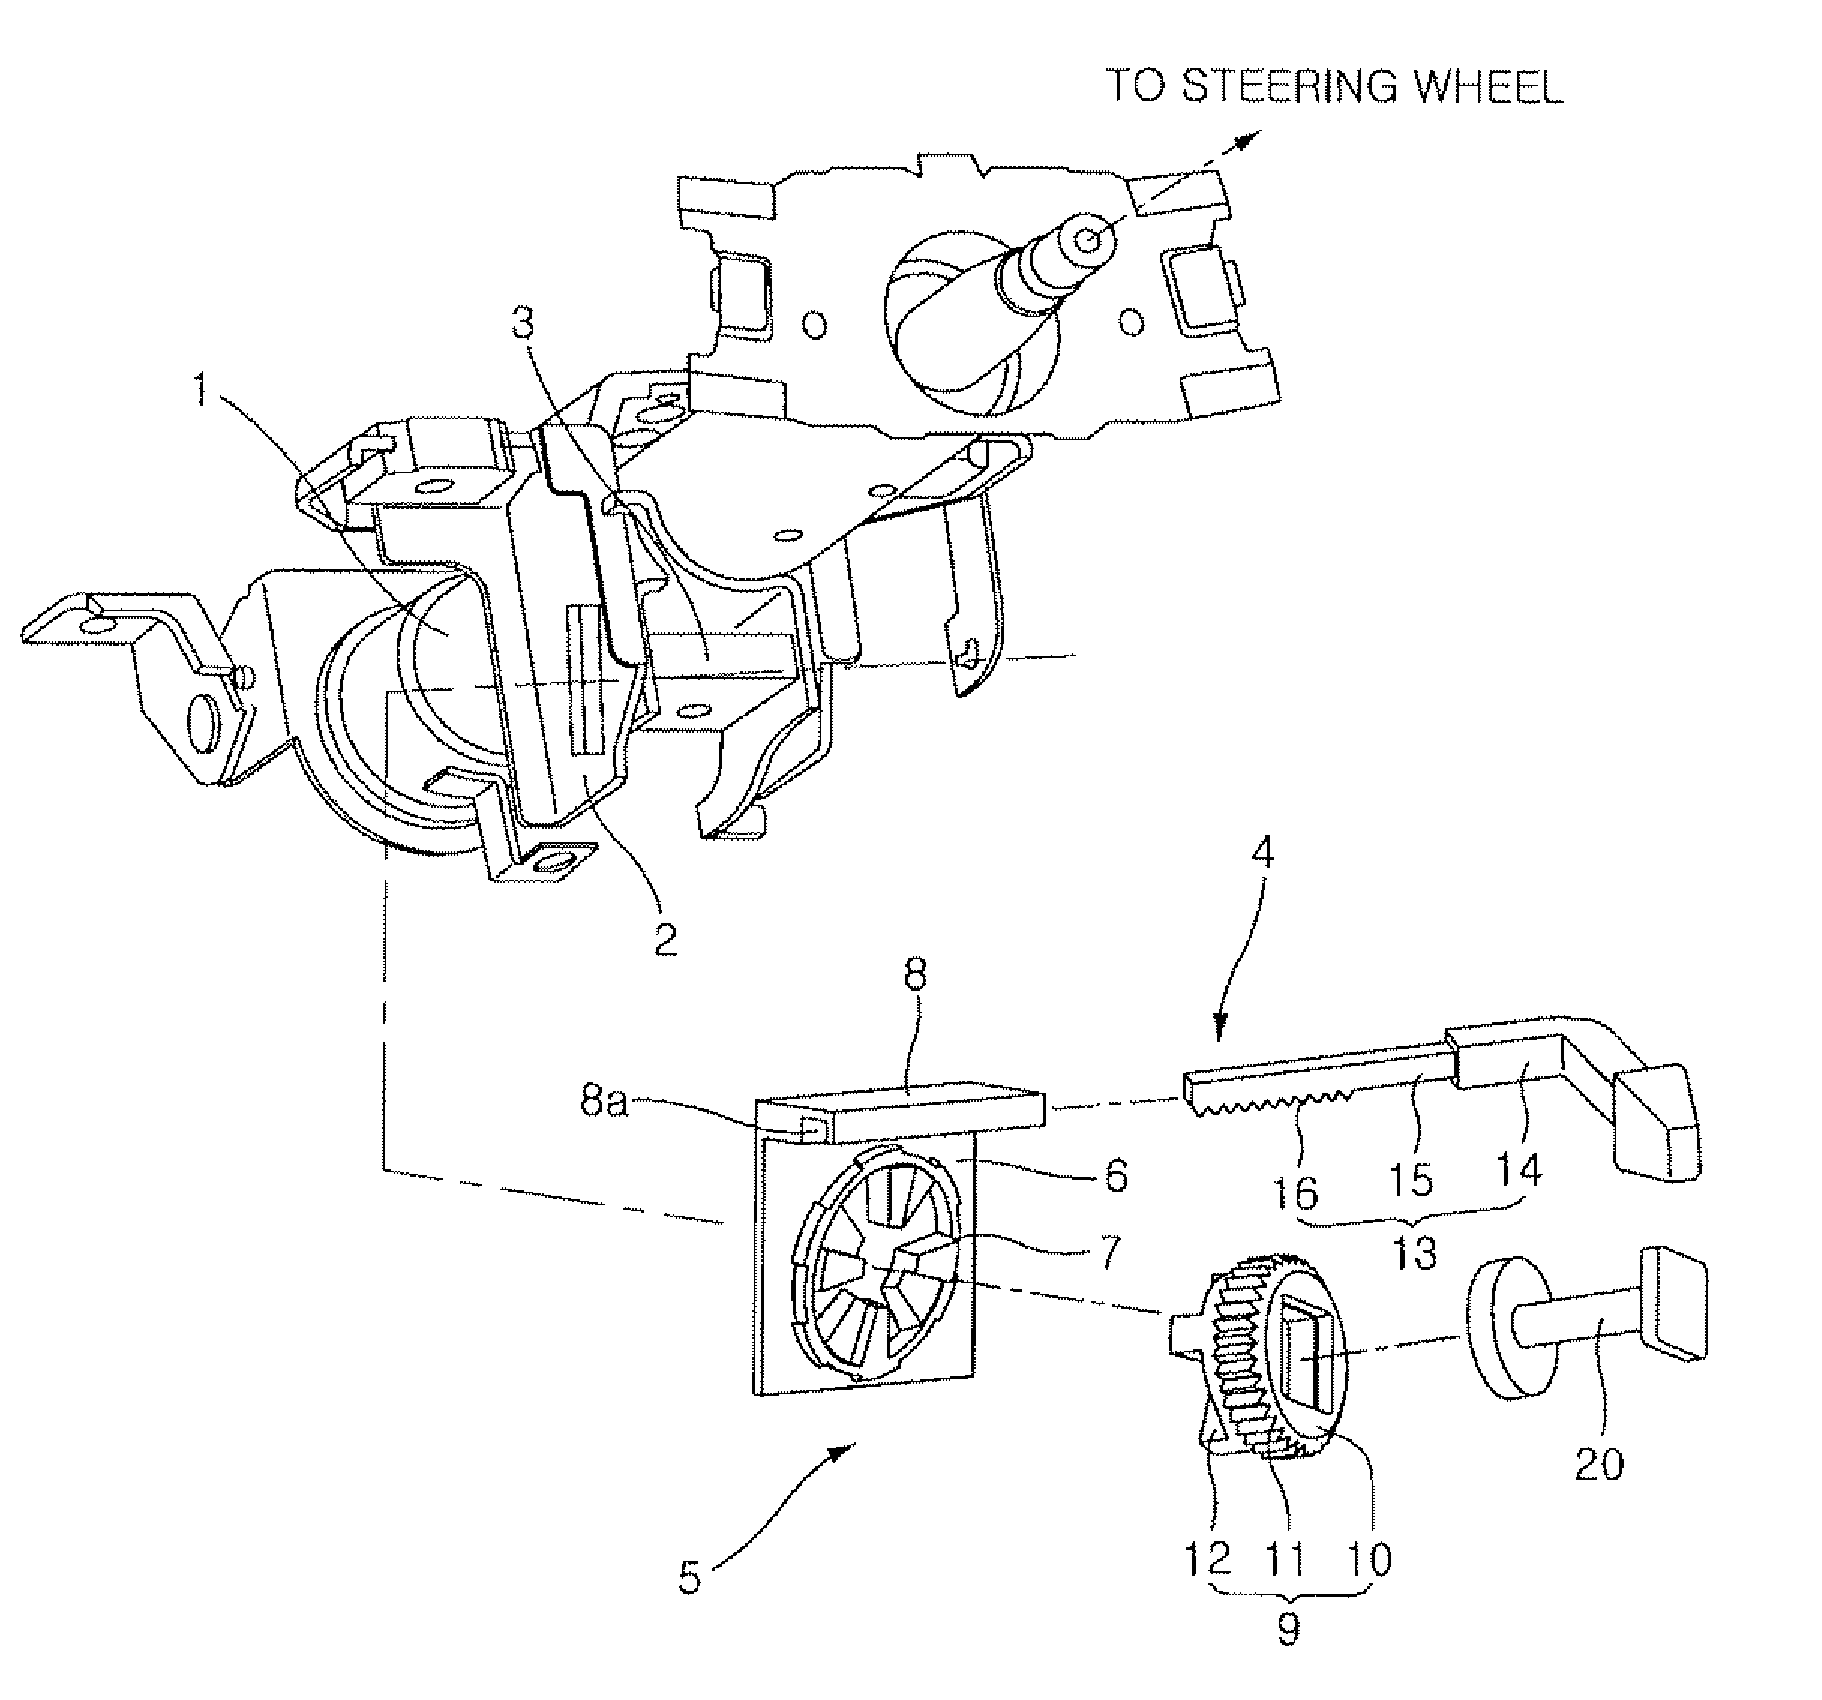 Push-pull type tilt lever assembly for steering system of vehicle